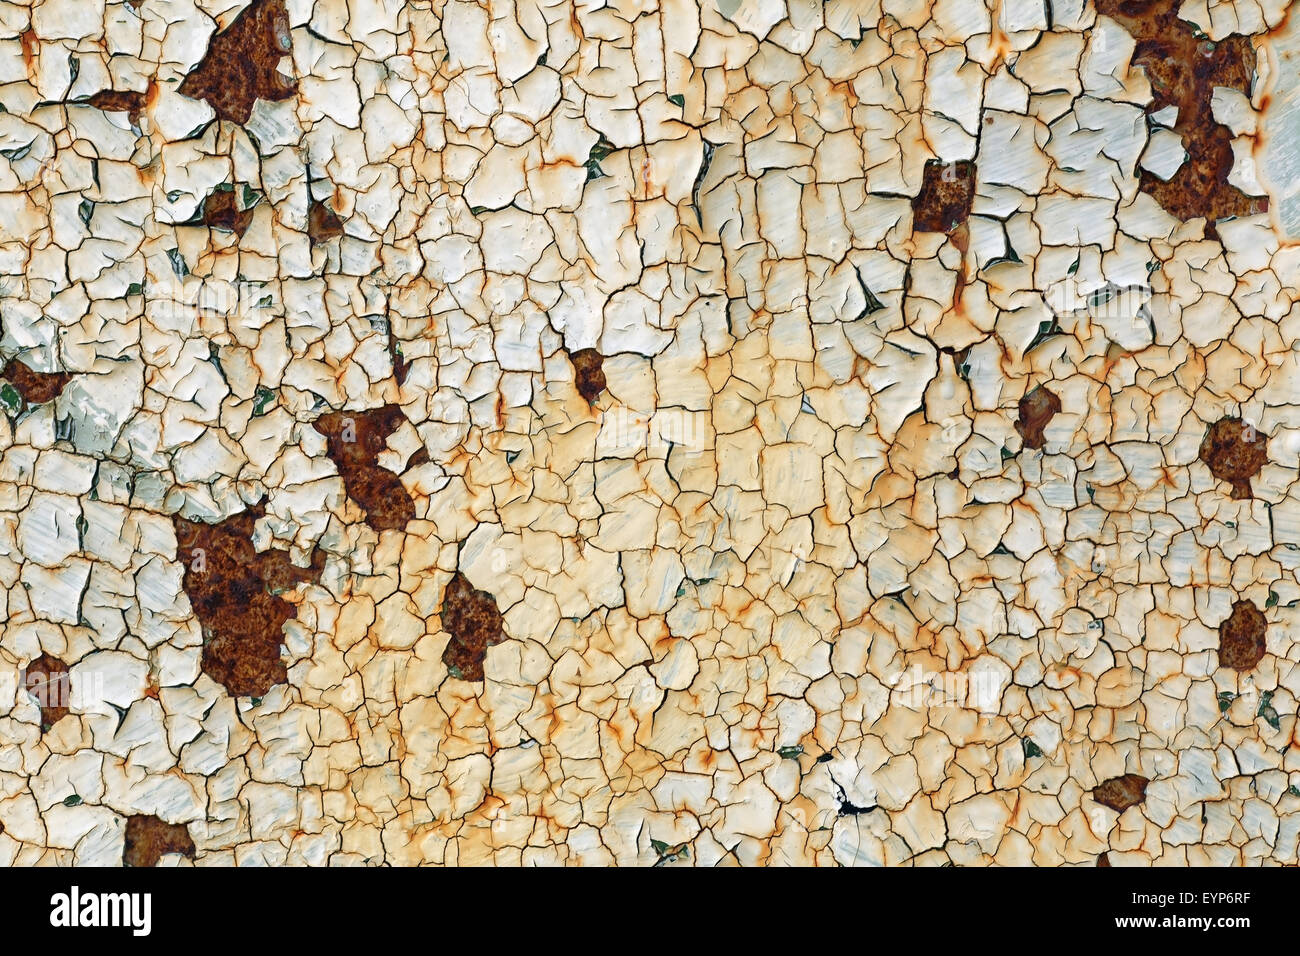 Grunge background with old peeling paint. Texture of rusty metal with cracked paint. Stock Photo